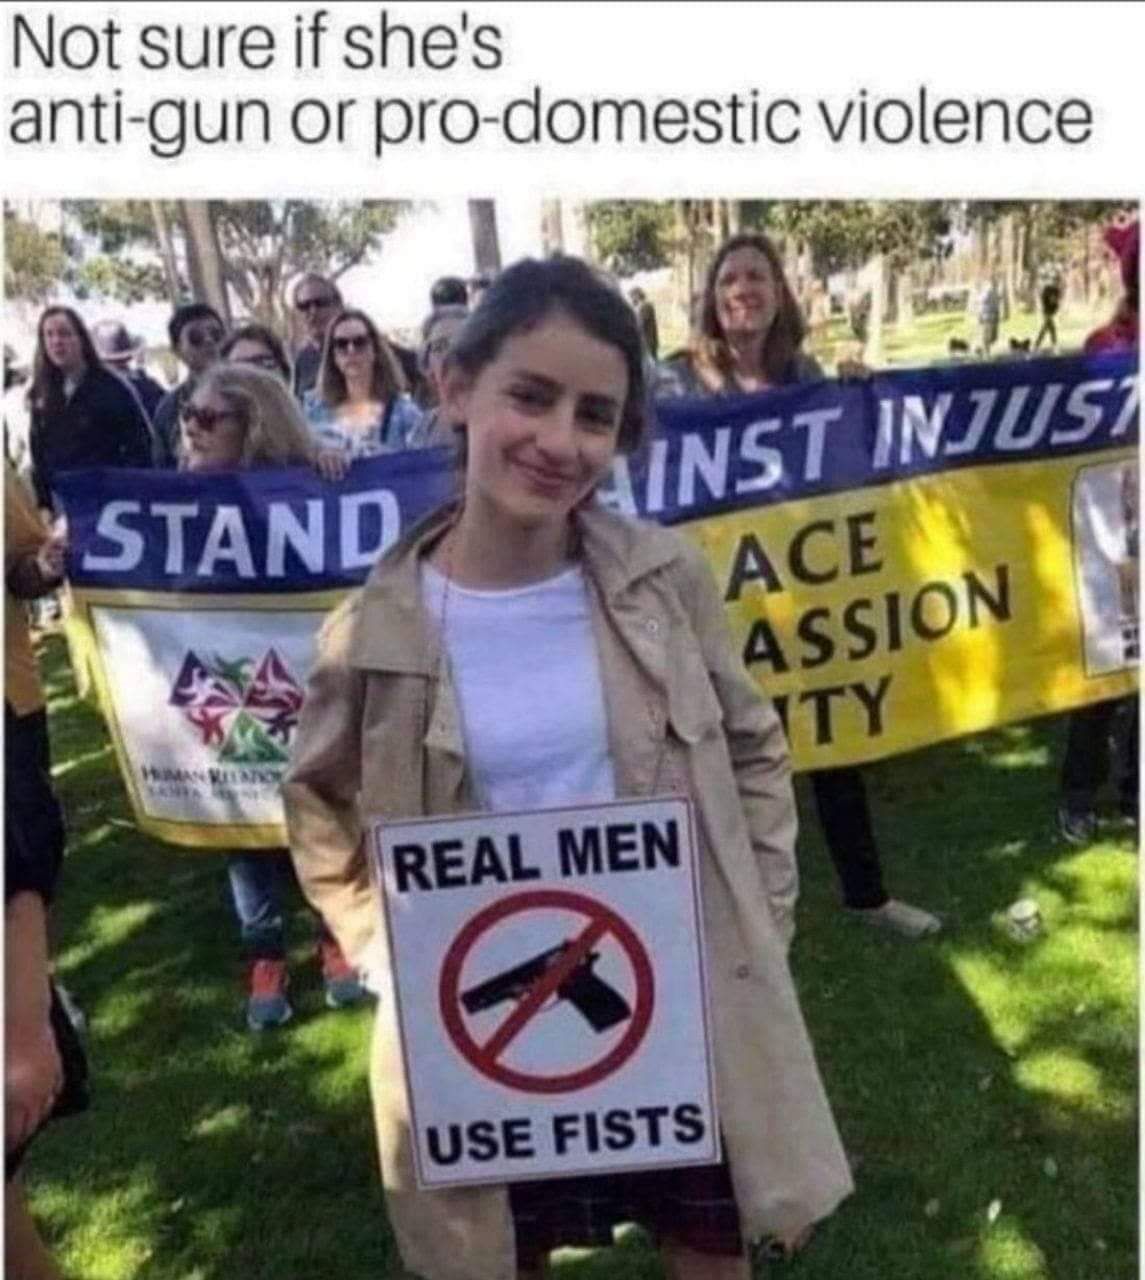 Real men hit their wives and don't shoot them